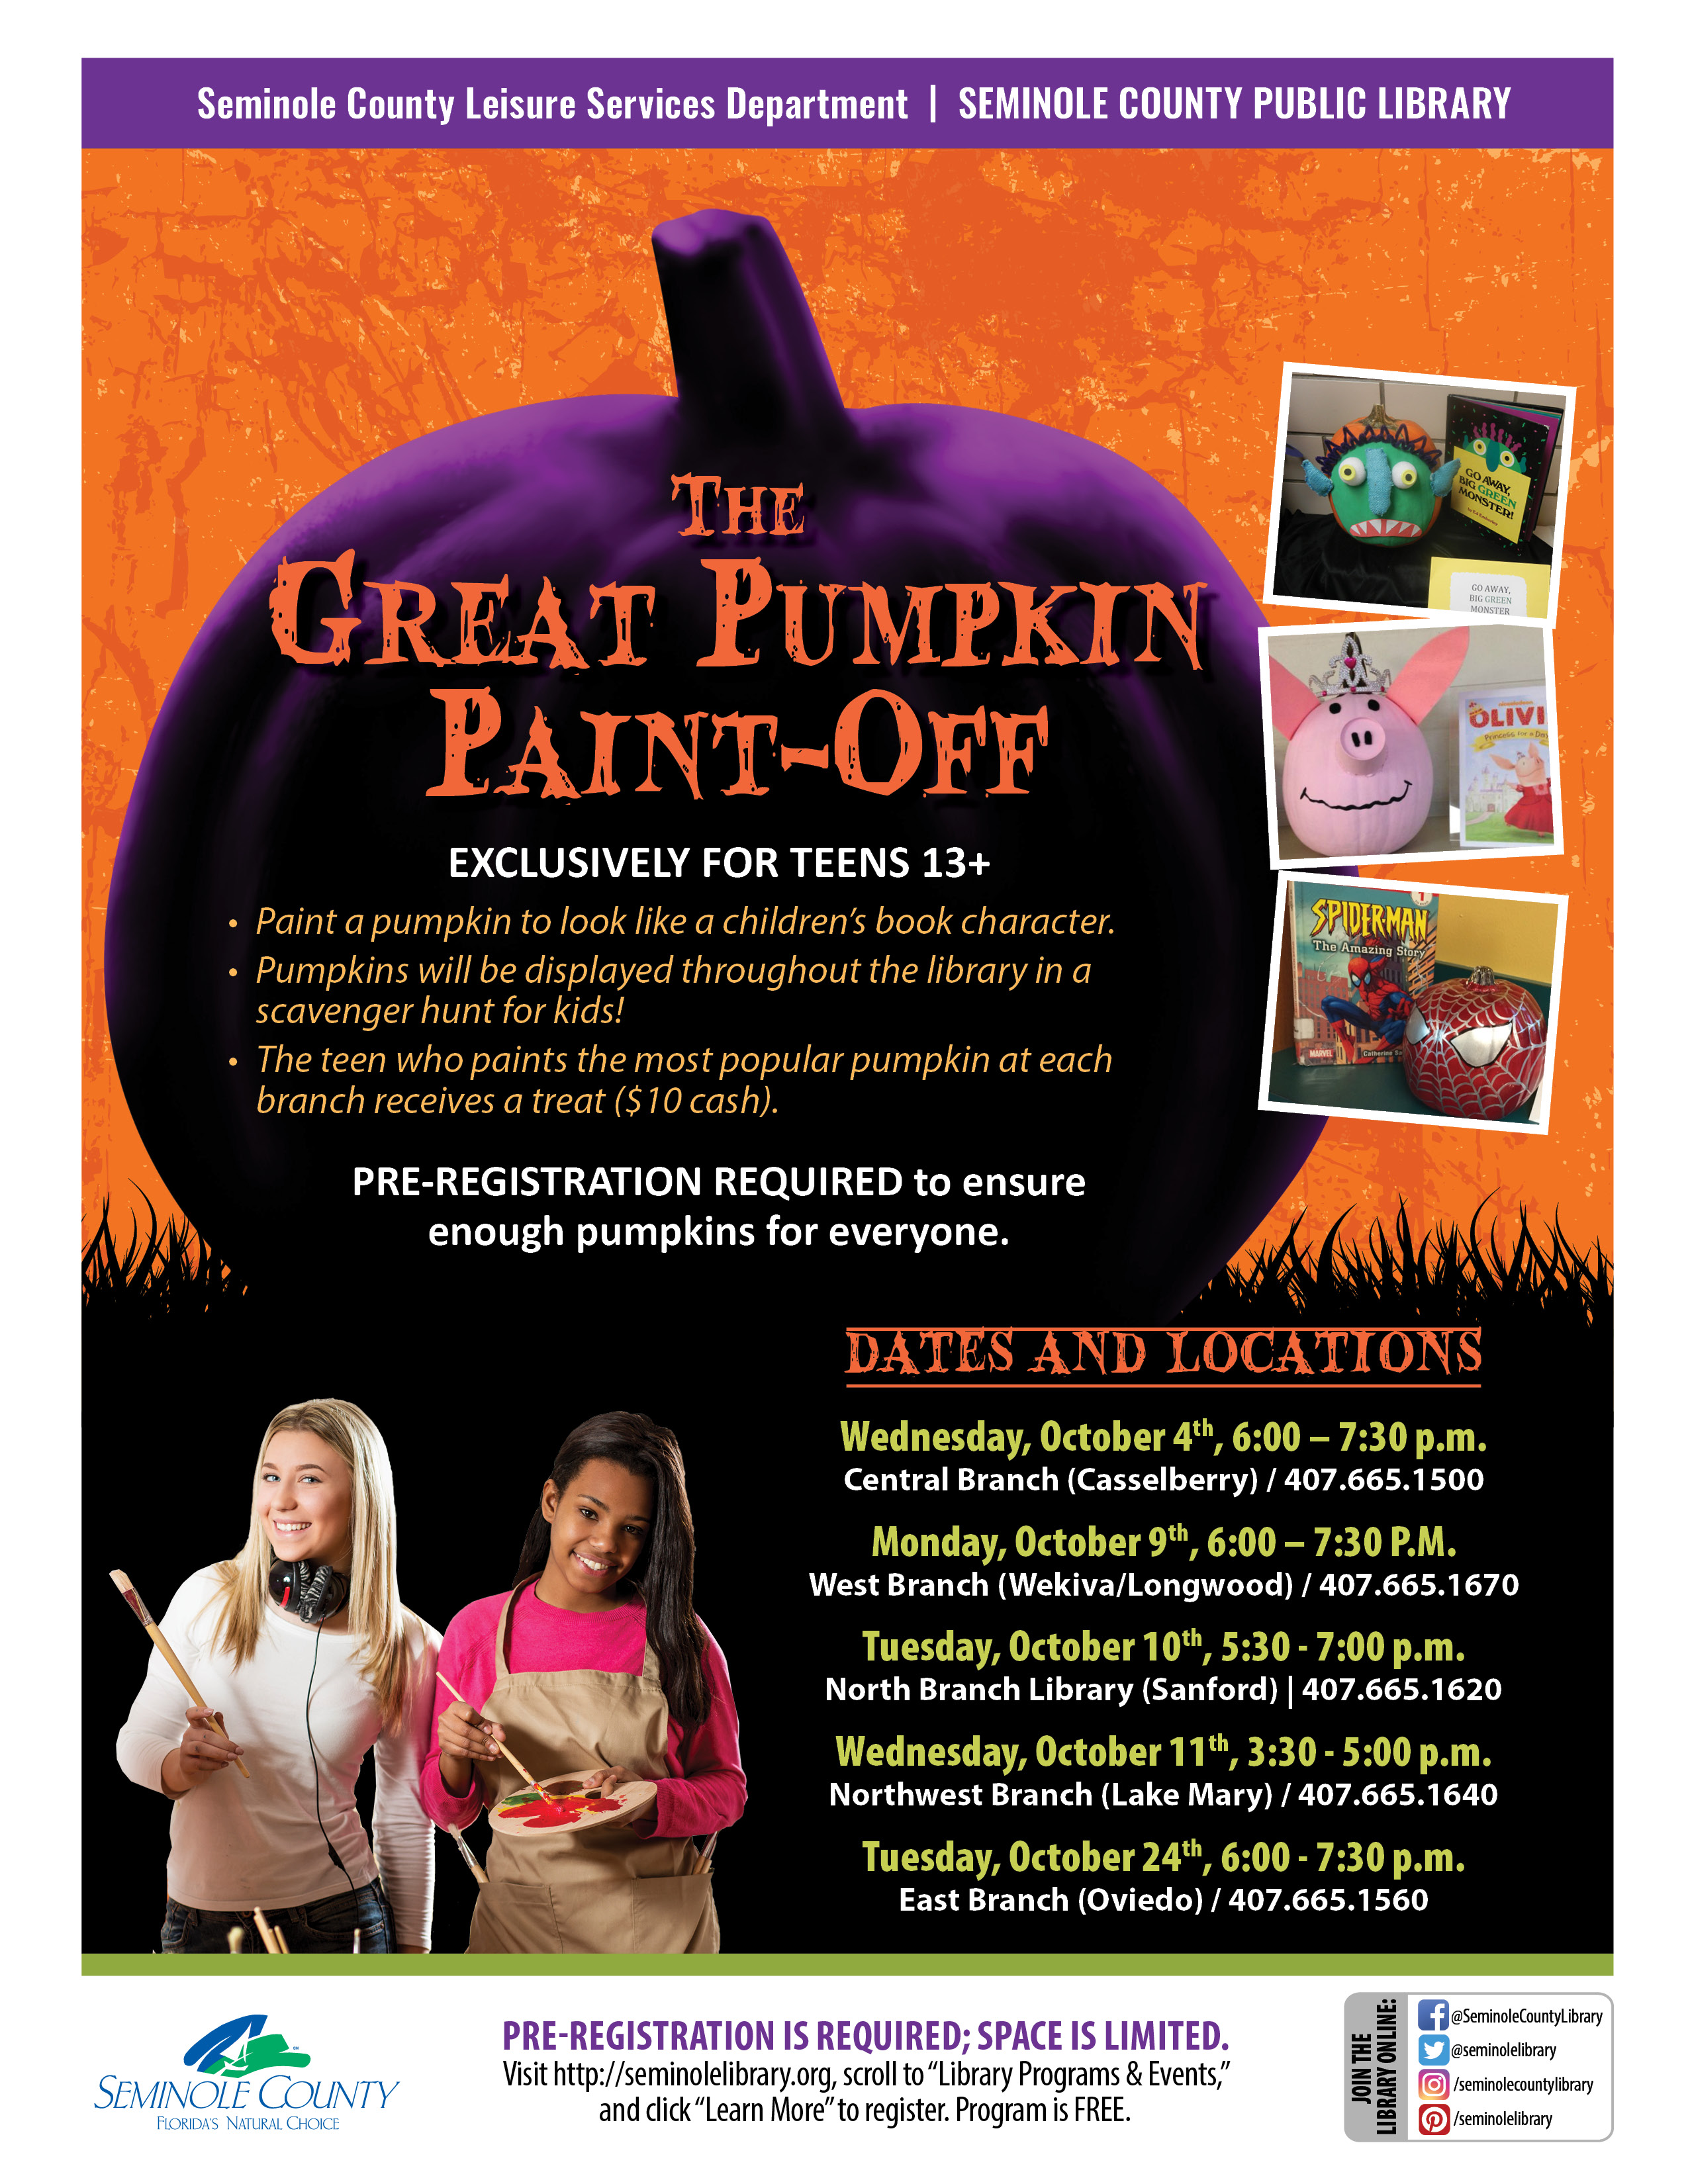 The Great Pumpkin Paint-Off for Teens